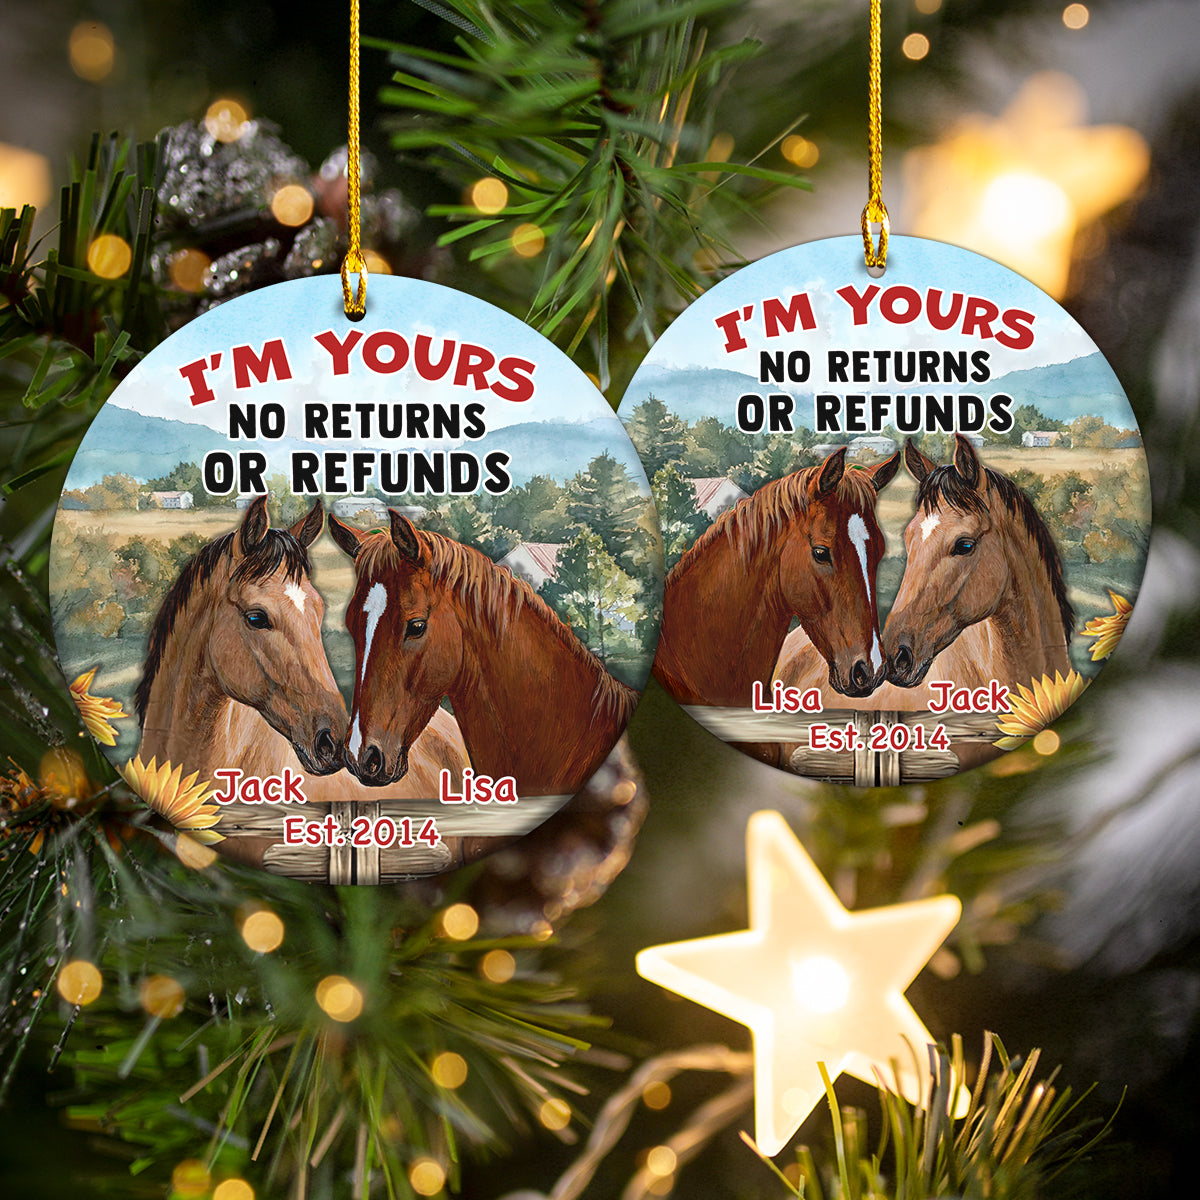 I'm Your No Returns Or Refunds Personalized Circle Ornament Christmas Gift For Married Couples Love Horse